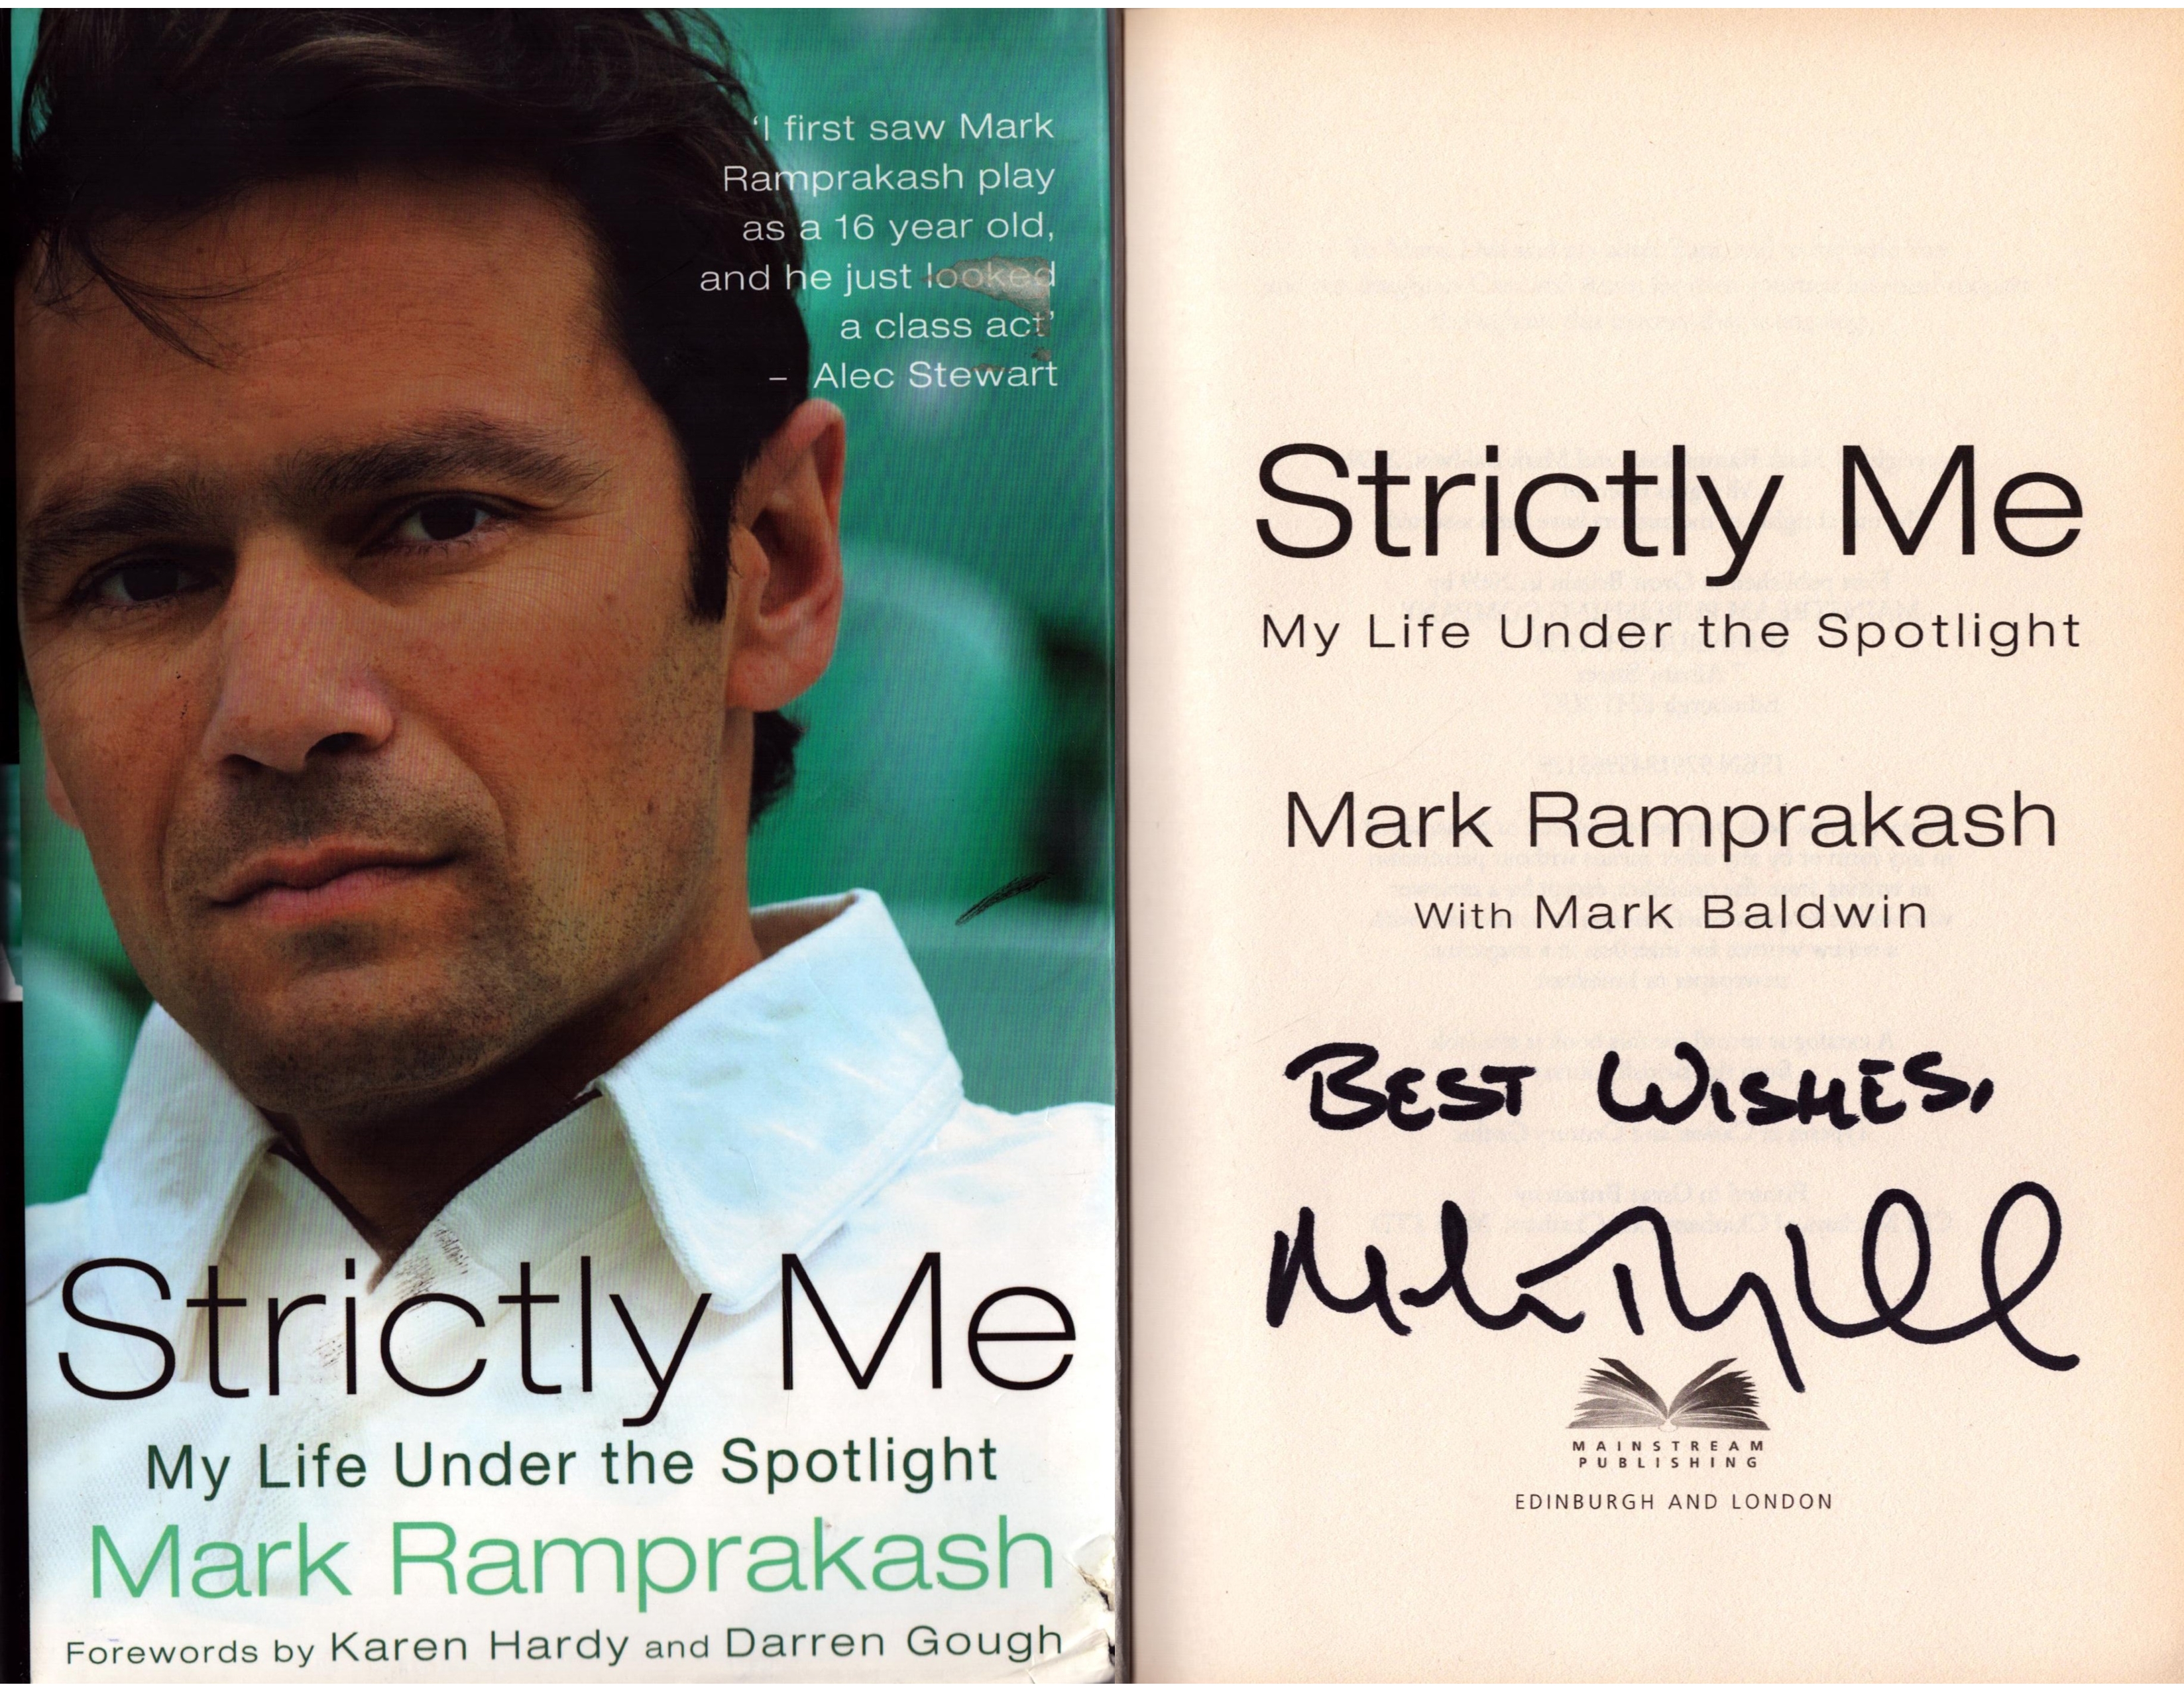 Strictly Me: My Life Under the Spotlight by Mark Ramprakash signed by author, hardcover book with